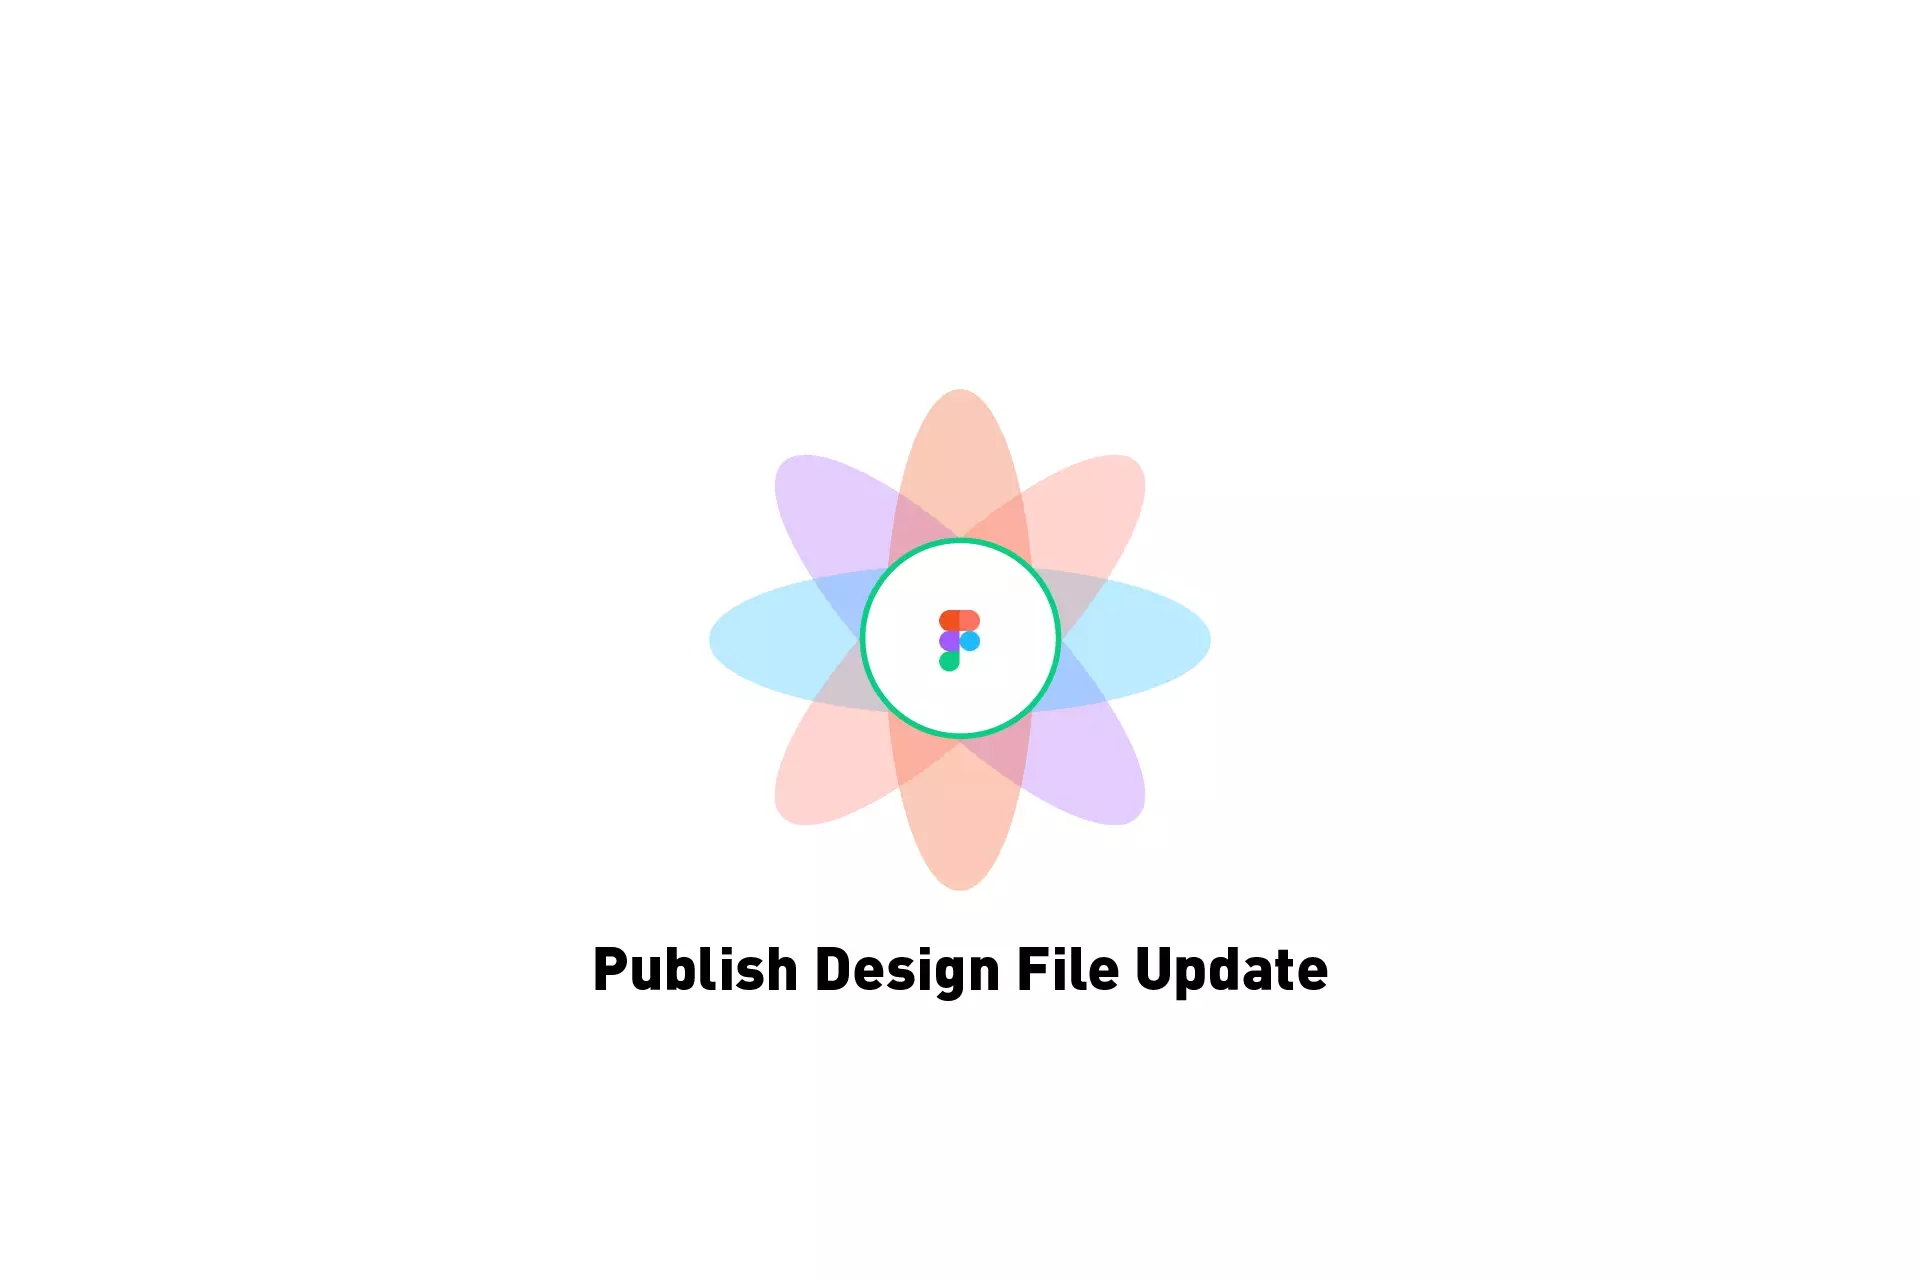 A flower that represents Figma with the text "Publish Design File Update" beneath it.